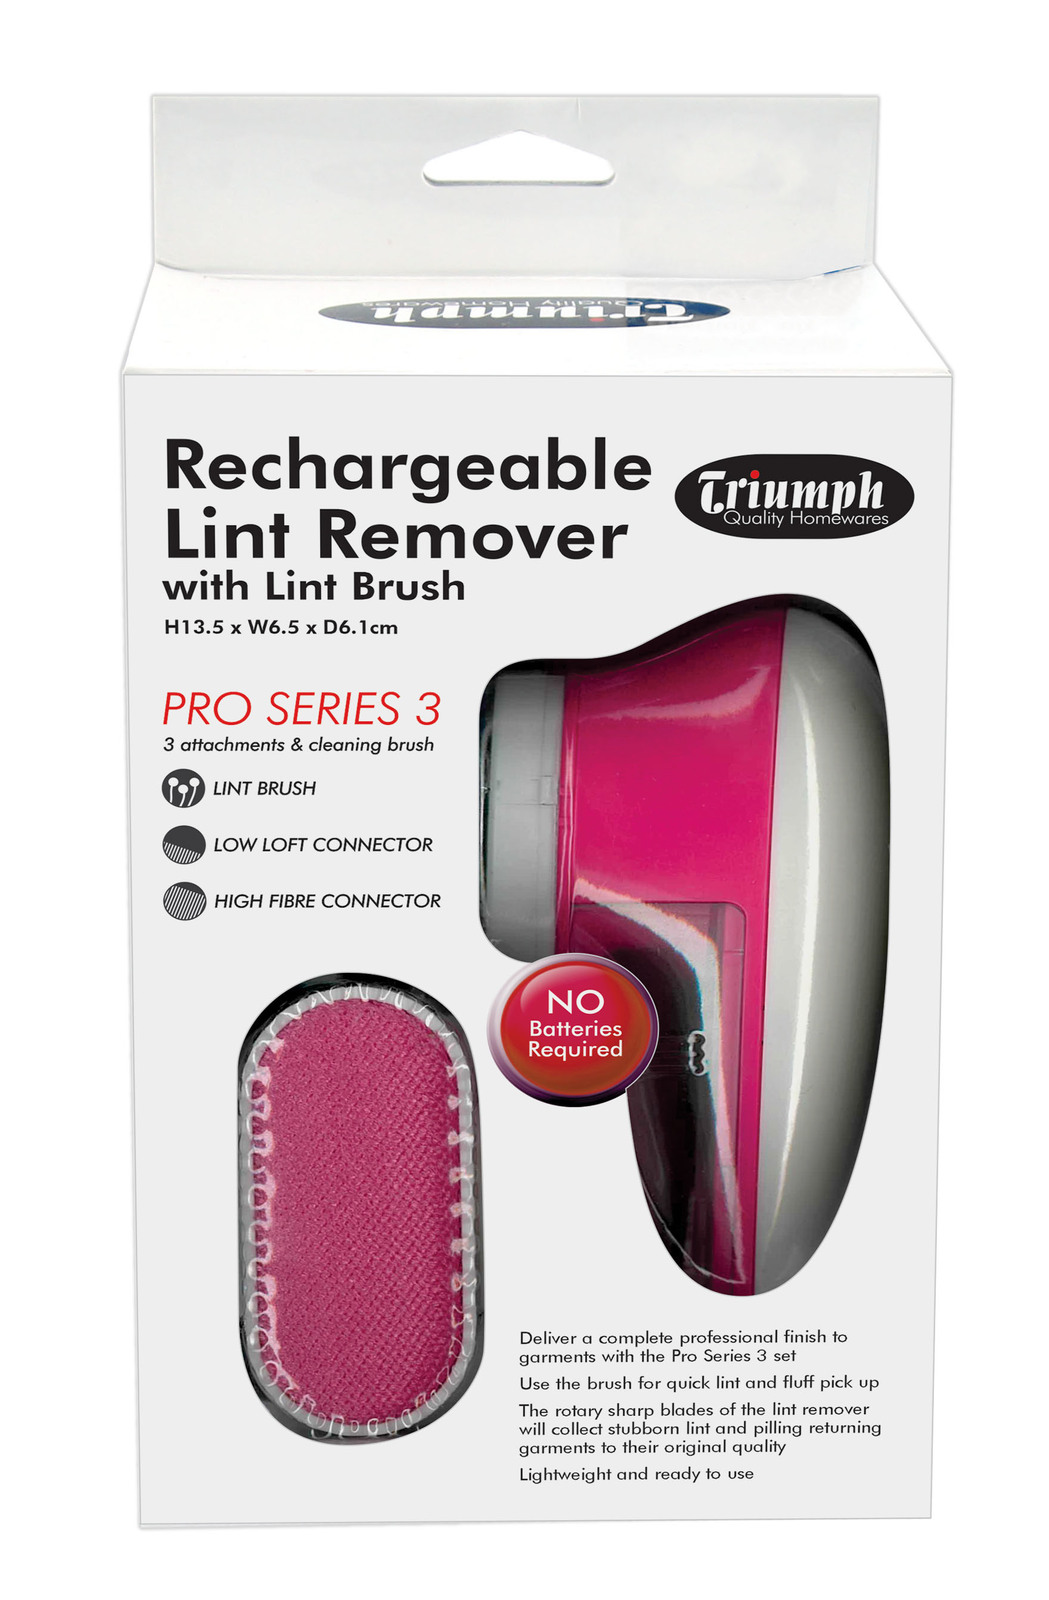 Triumph Rechargeable Lint Shaver Remover with Brush